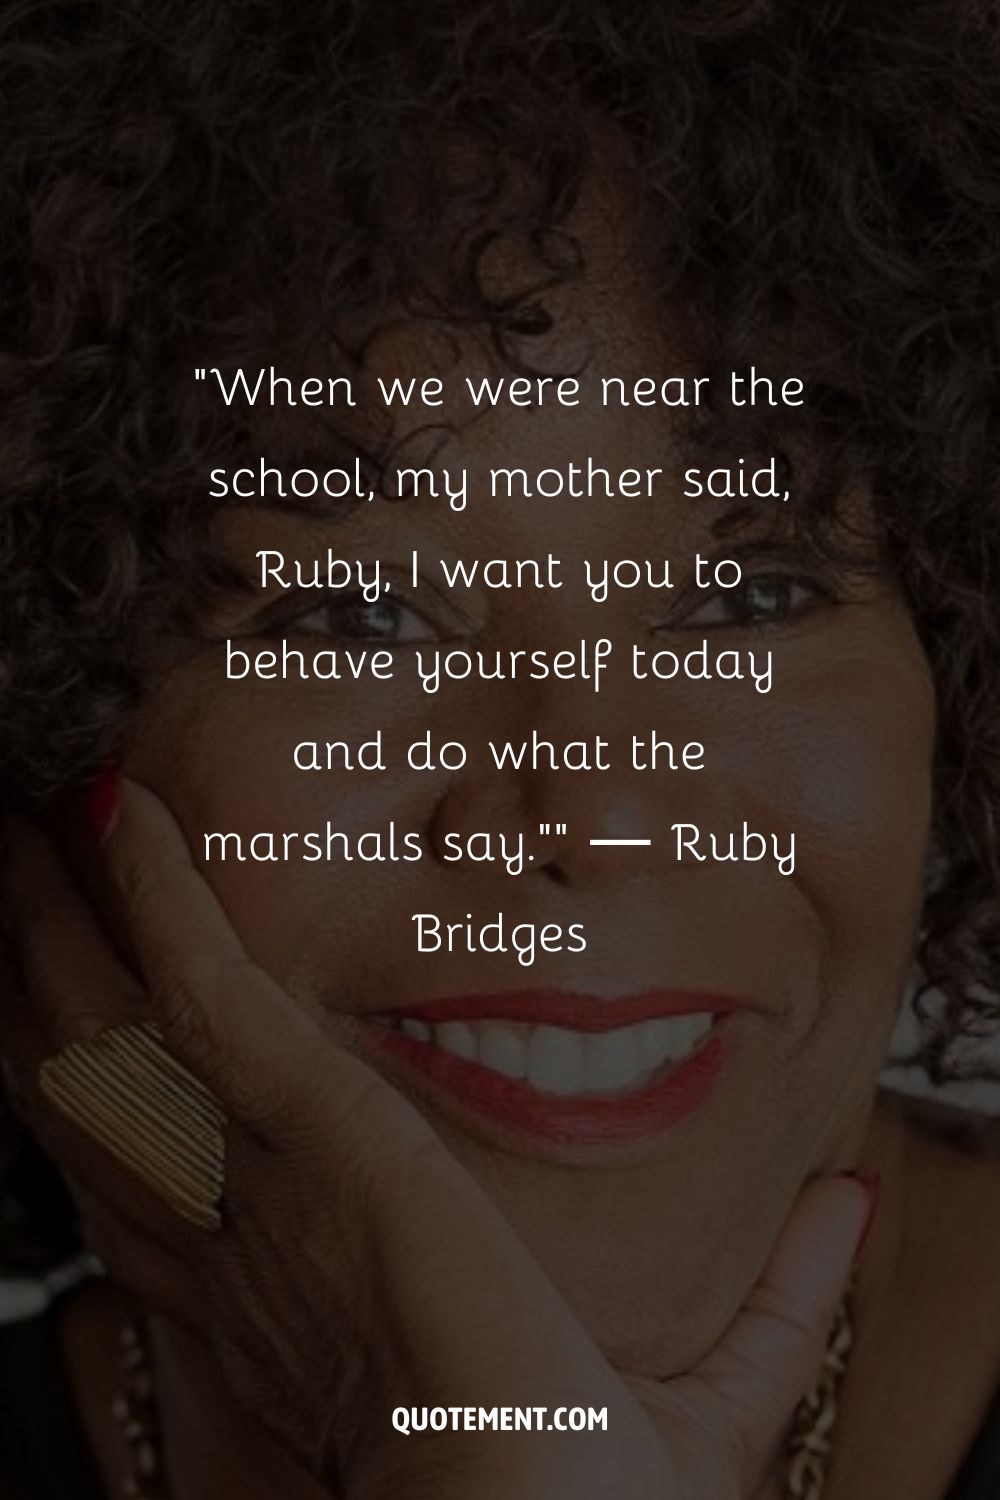 When we were near the school, my mother said, Ruby, I want you to behave yourself today